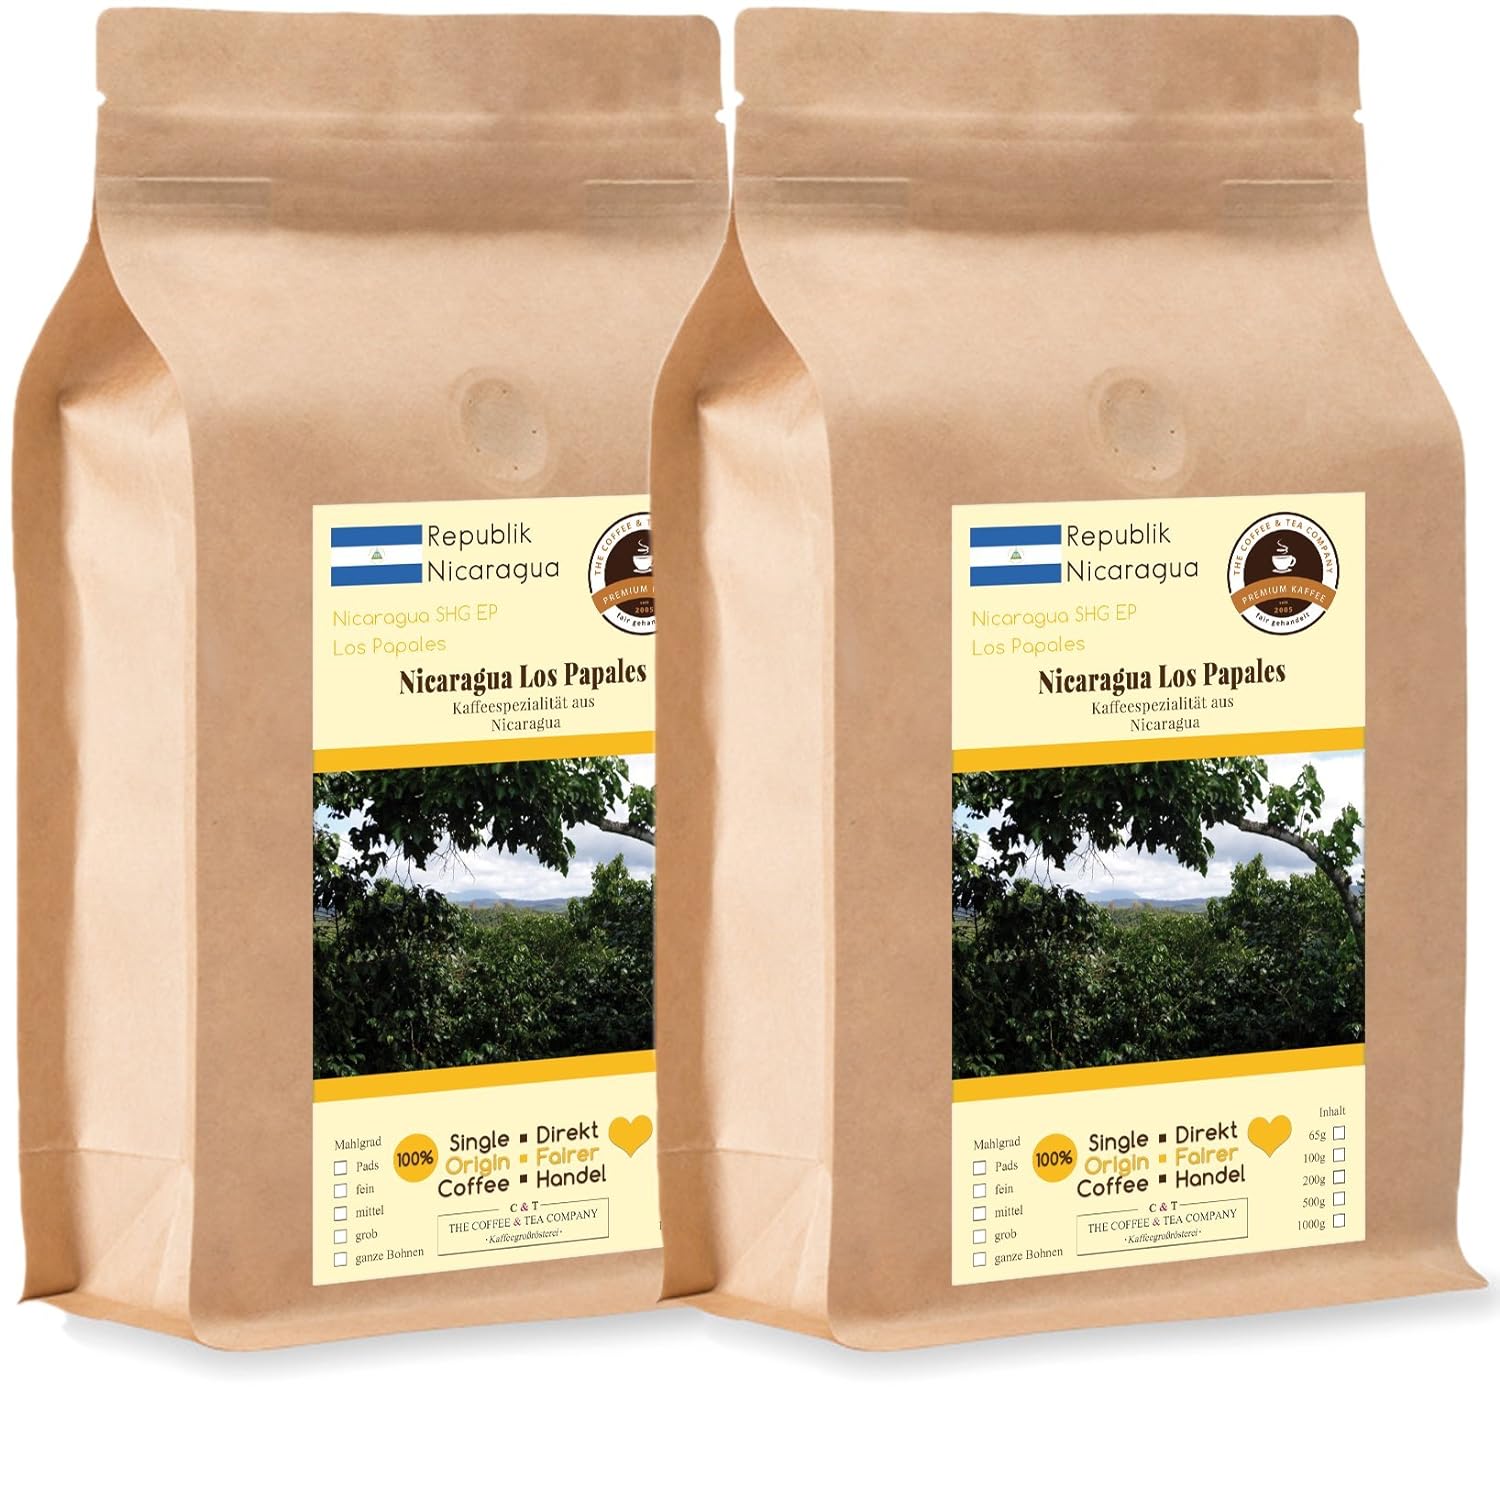 Coffee Globetrotter - Coffee With Heart - Nicaragua Los Papales - 2 x 1000 g Whole Bean - for Fully Automatic Coffee Grinder - Roasted Coffee Fair Trade | Refill Pack Economy Pack